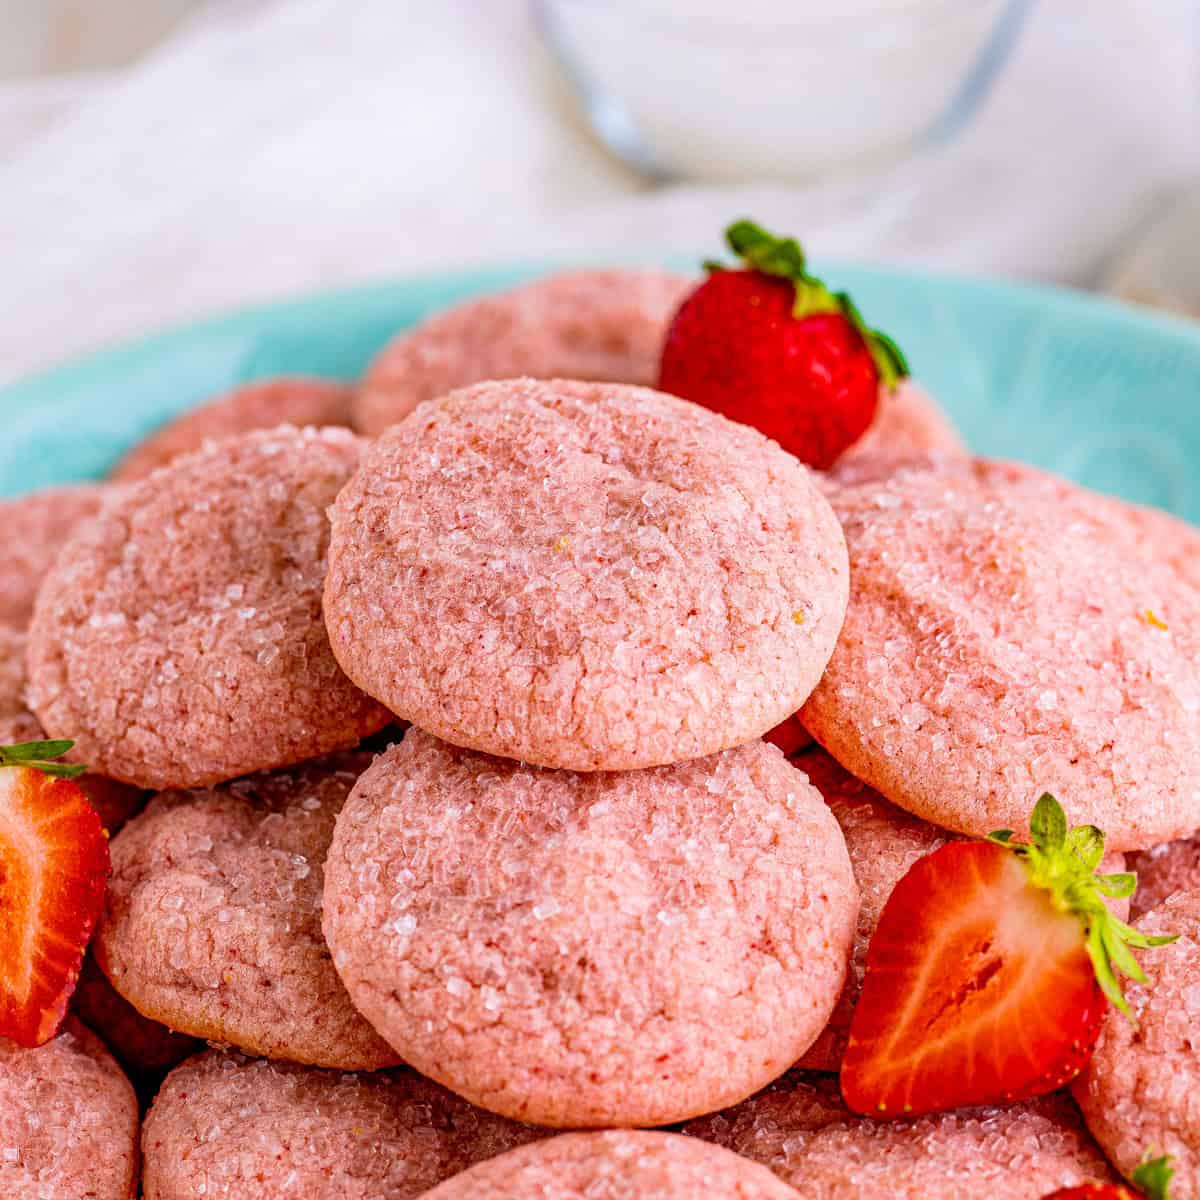 Square image of cookies stacked on top of one another on a blue plate with strawberries.